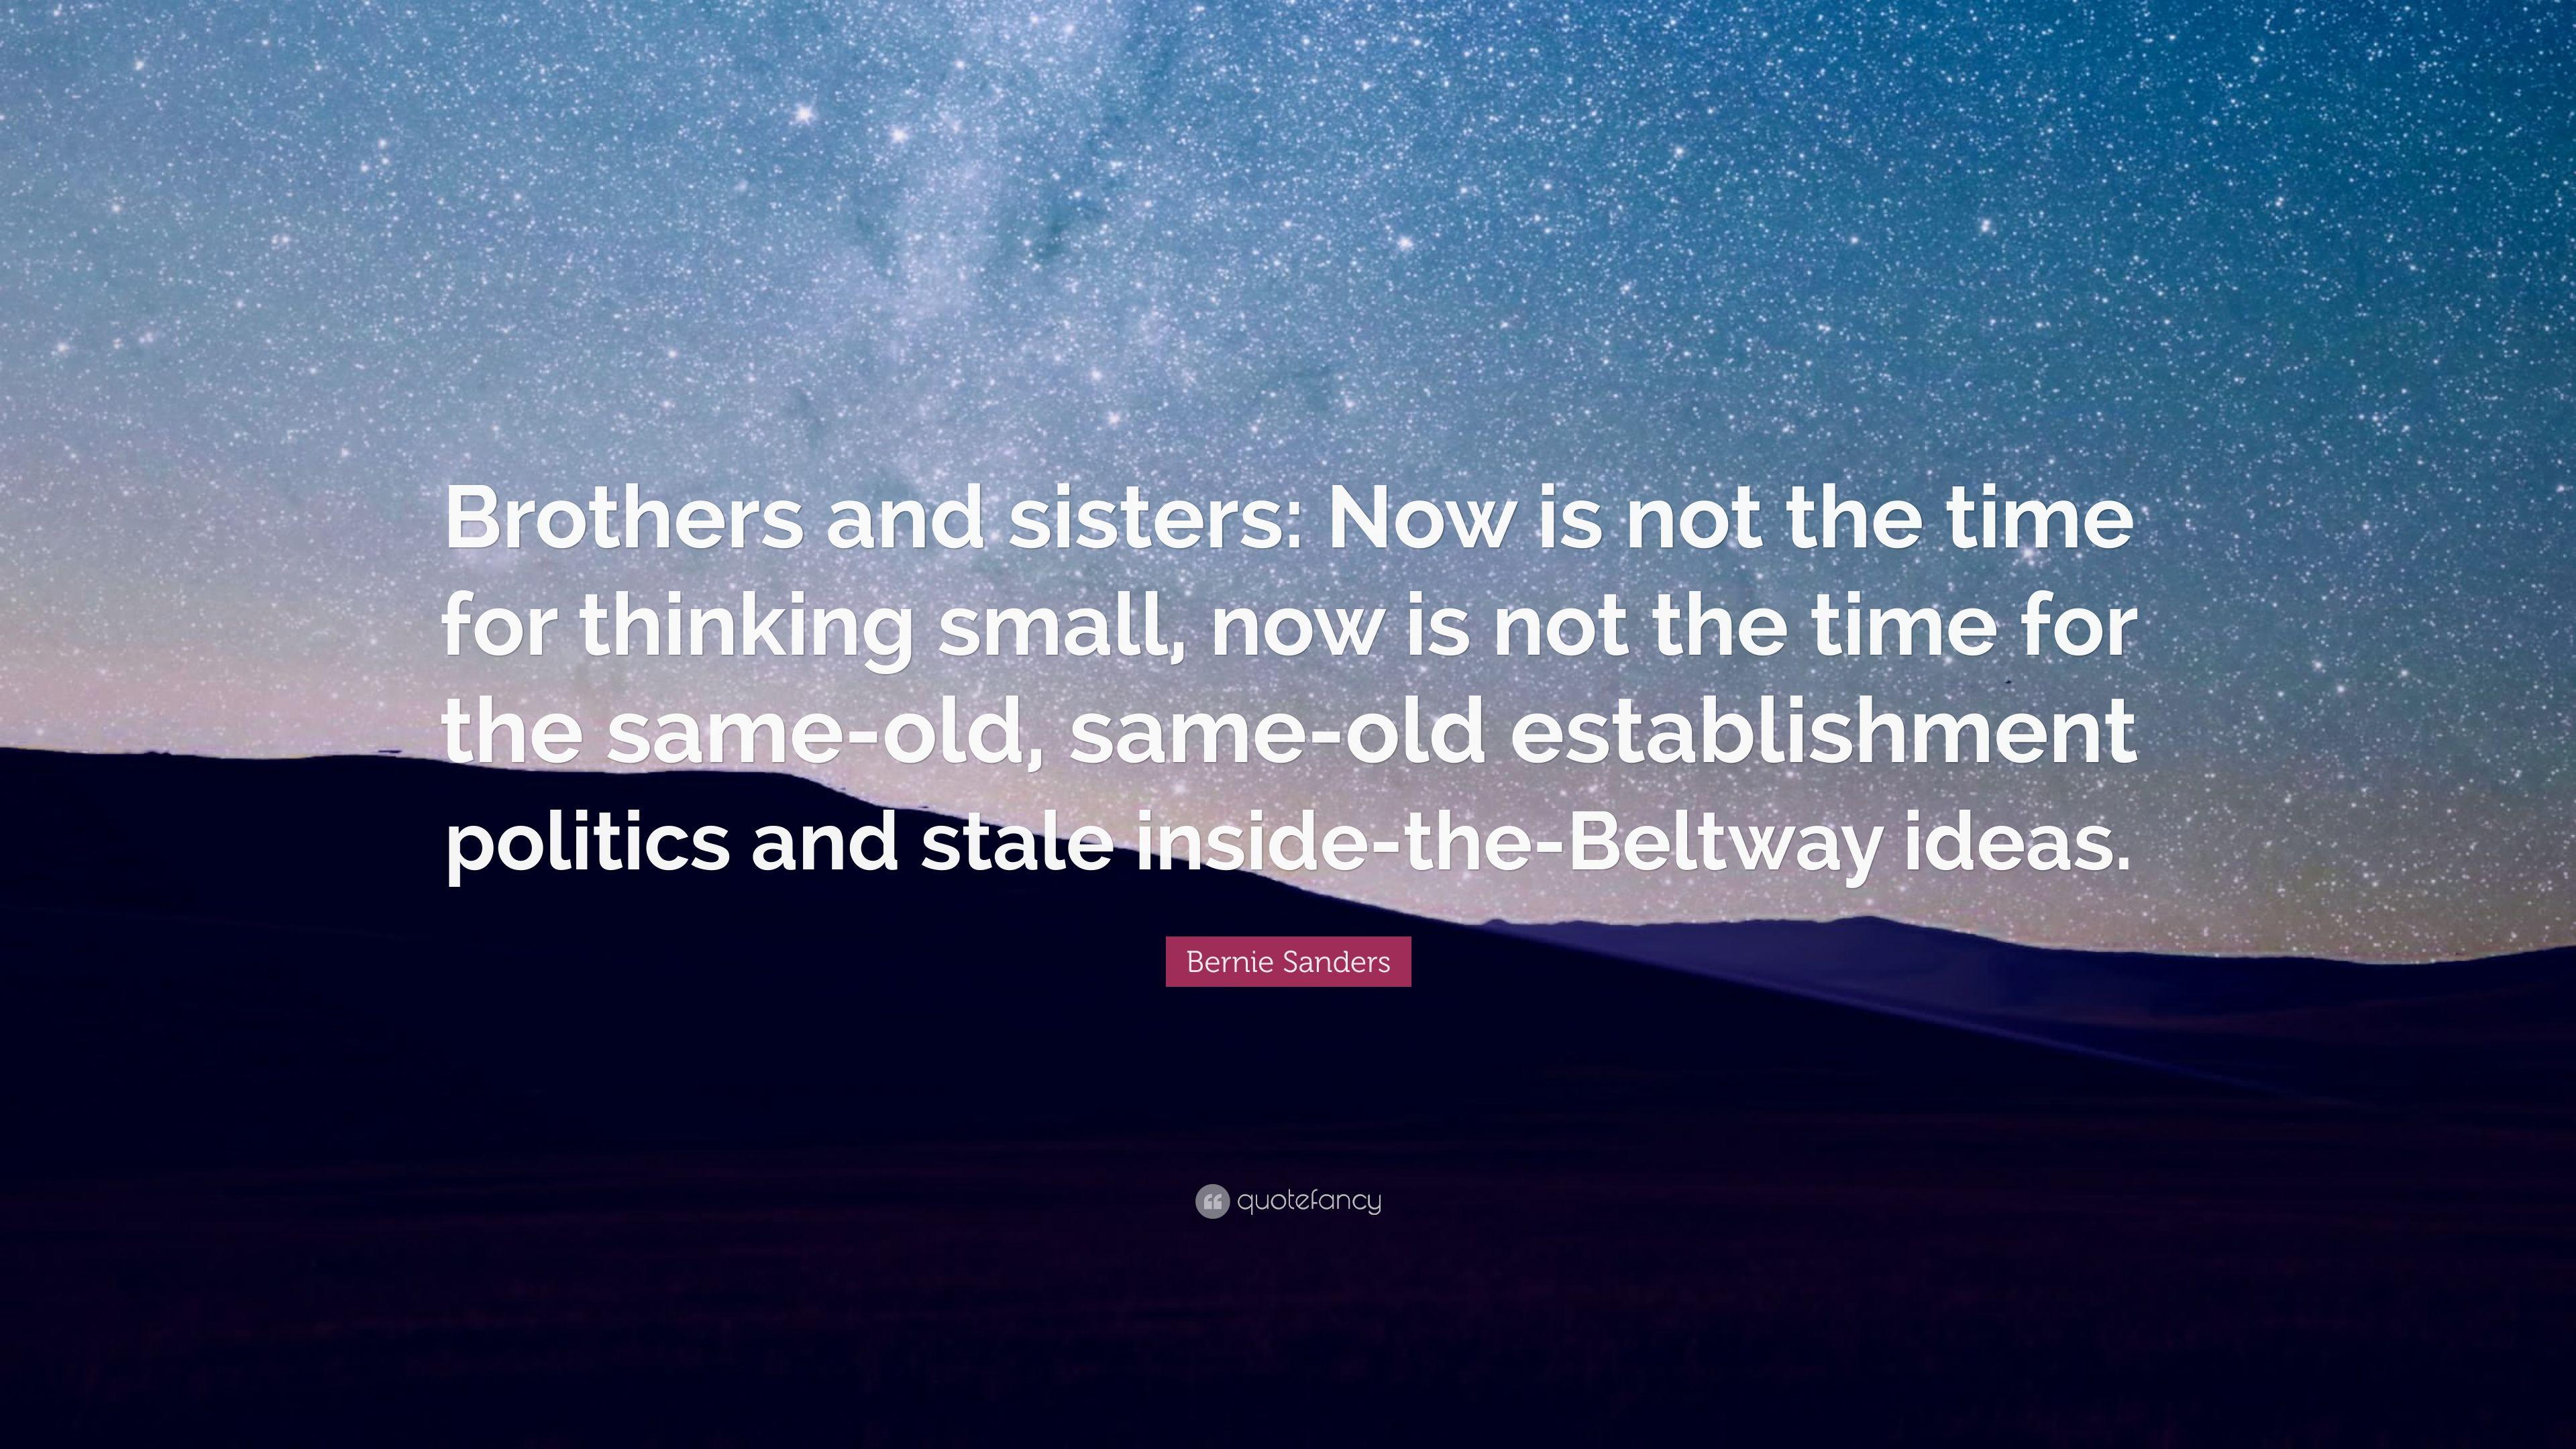 Bernie Sanders Quote: “Brothers and sisters: Now is not the time